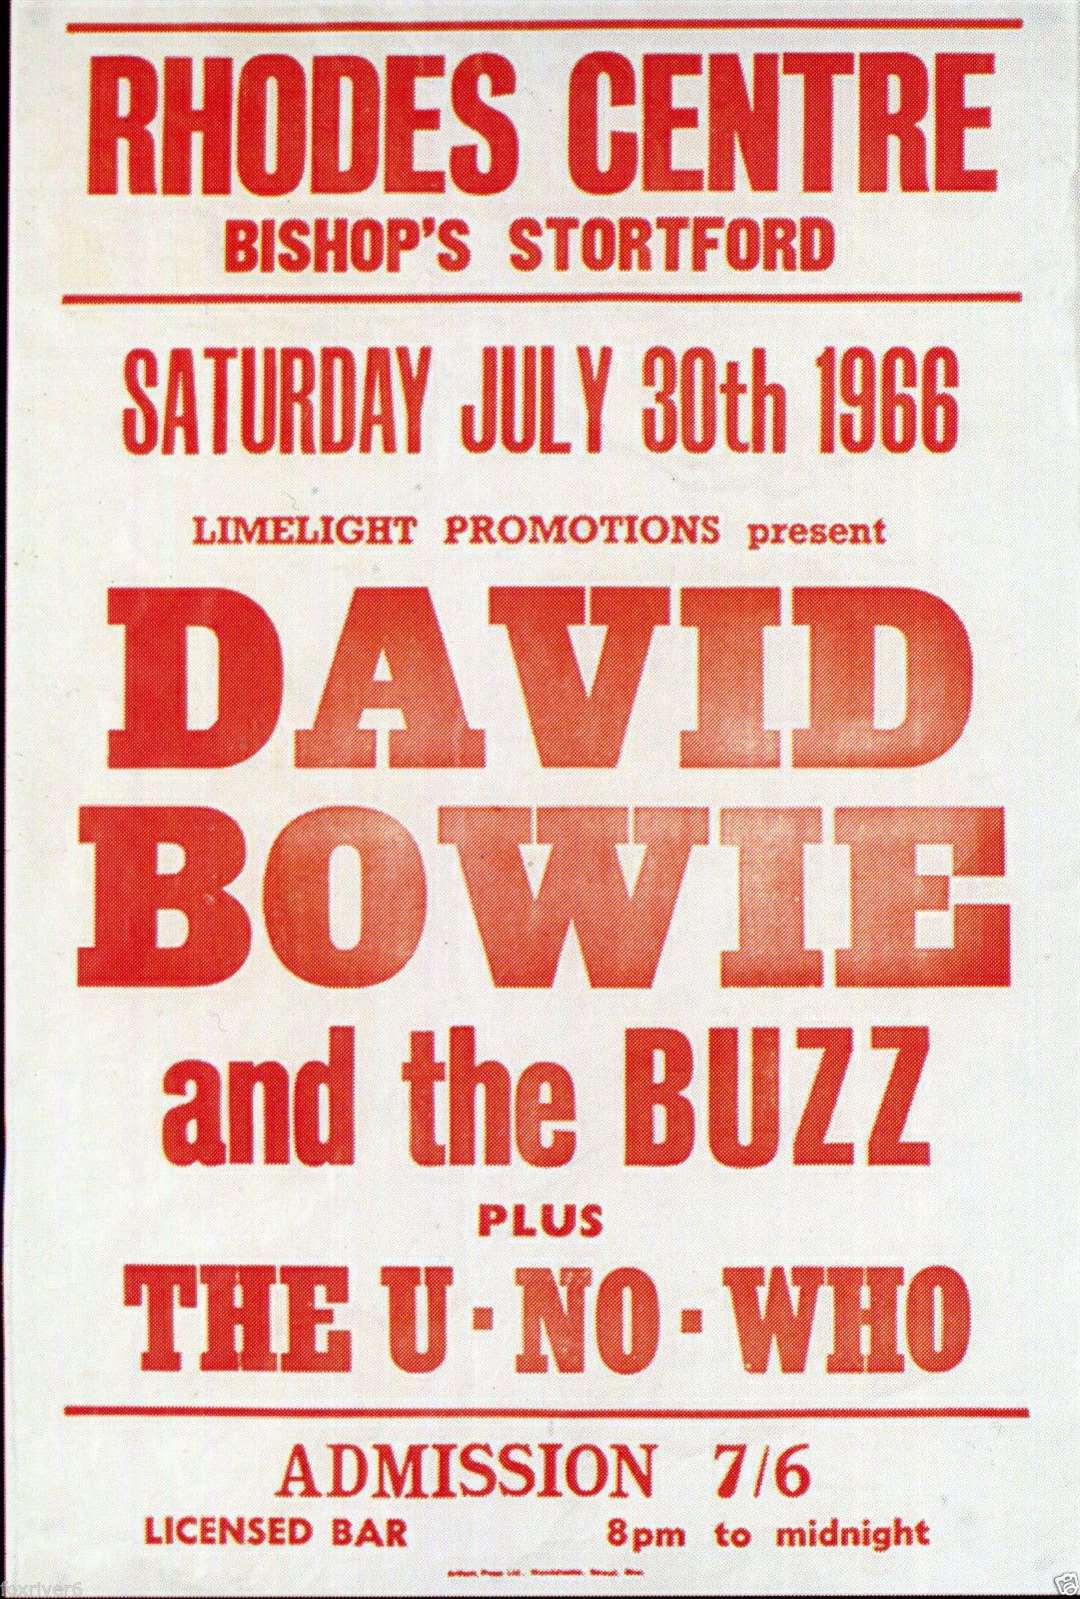 A promotional poster from 1966 for David Bowie and The Buzz